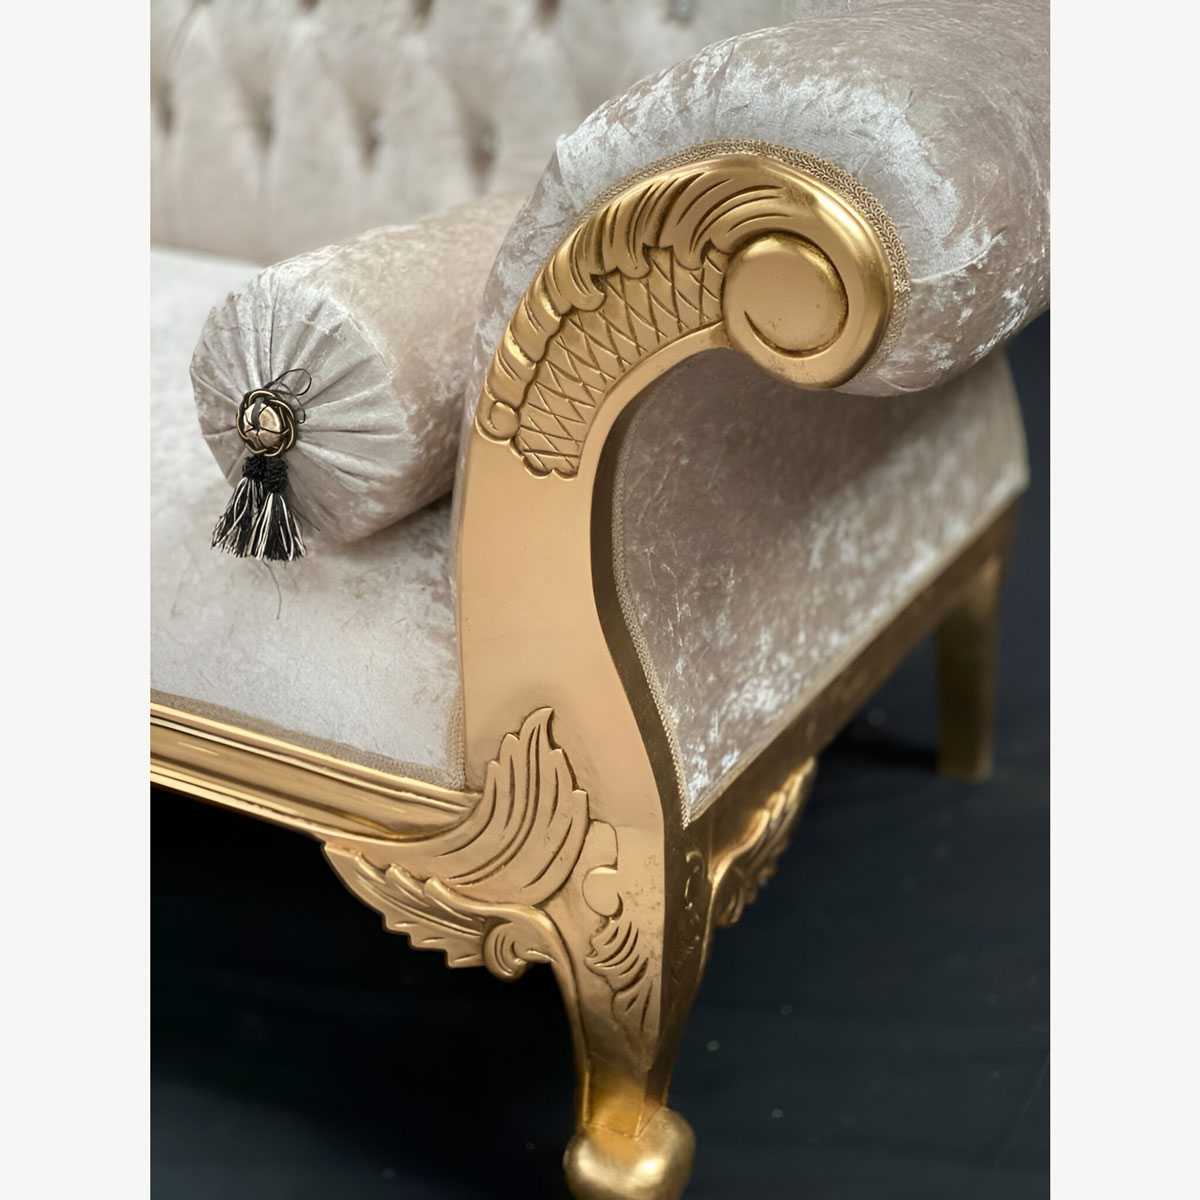 Charles Louis Cuddler Love Seat Chaise Sofa In Gold Leaf Frame Upholstered In Ivory Cream Crushed Velvet With Crystal Buttoning 4 - Hampshire Barn Interiors - Charles Louis Cuddler Love Seat Chaise Sofa In Gold Leaf Frame Upholstered In Ivory Cream Crushed Velvet With Crystal Buttoning -